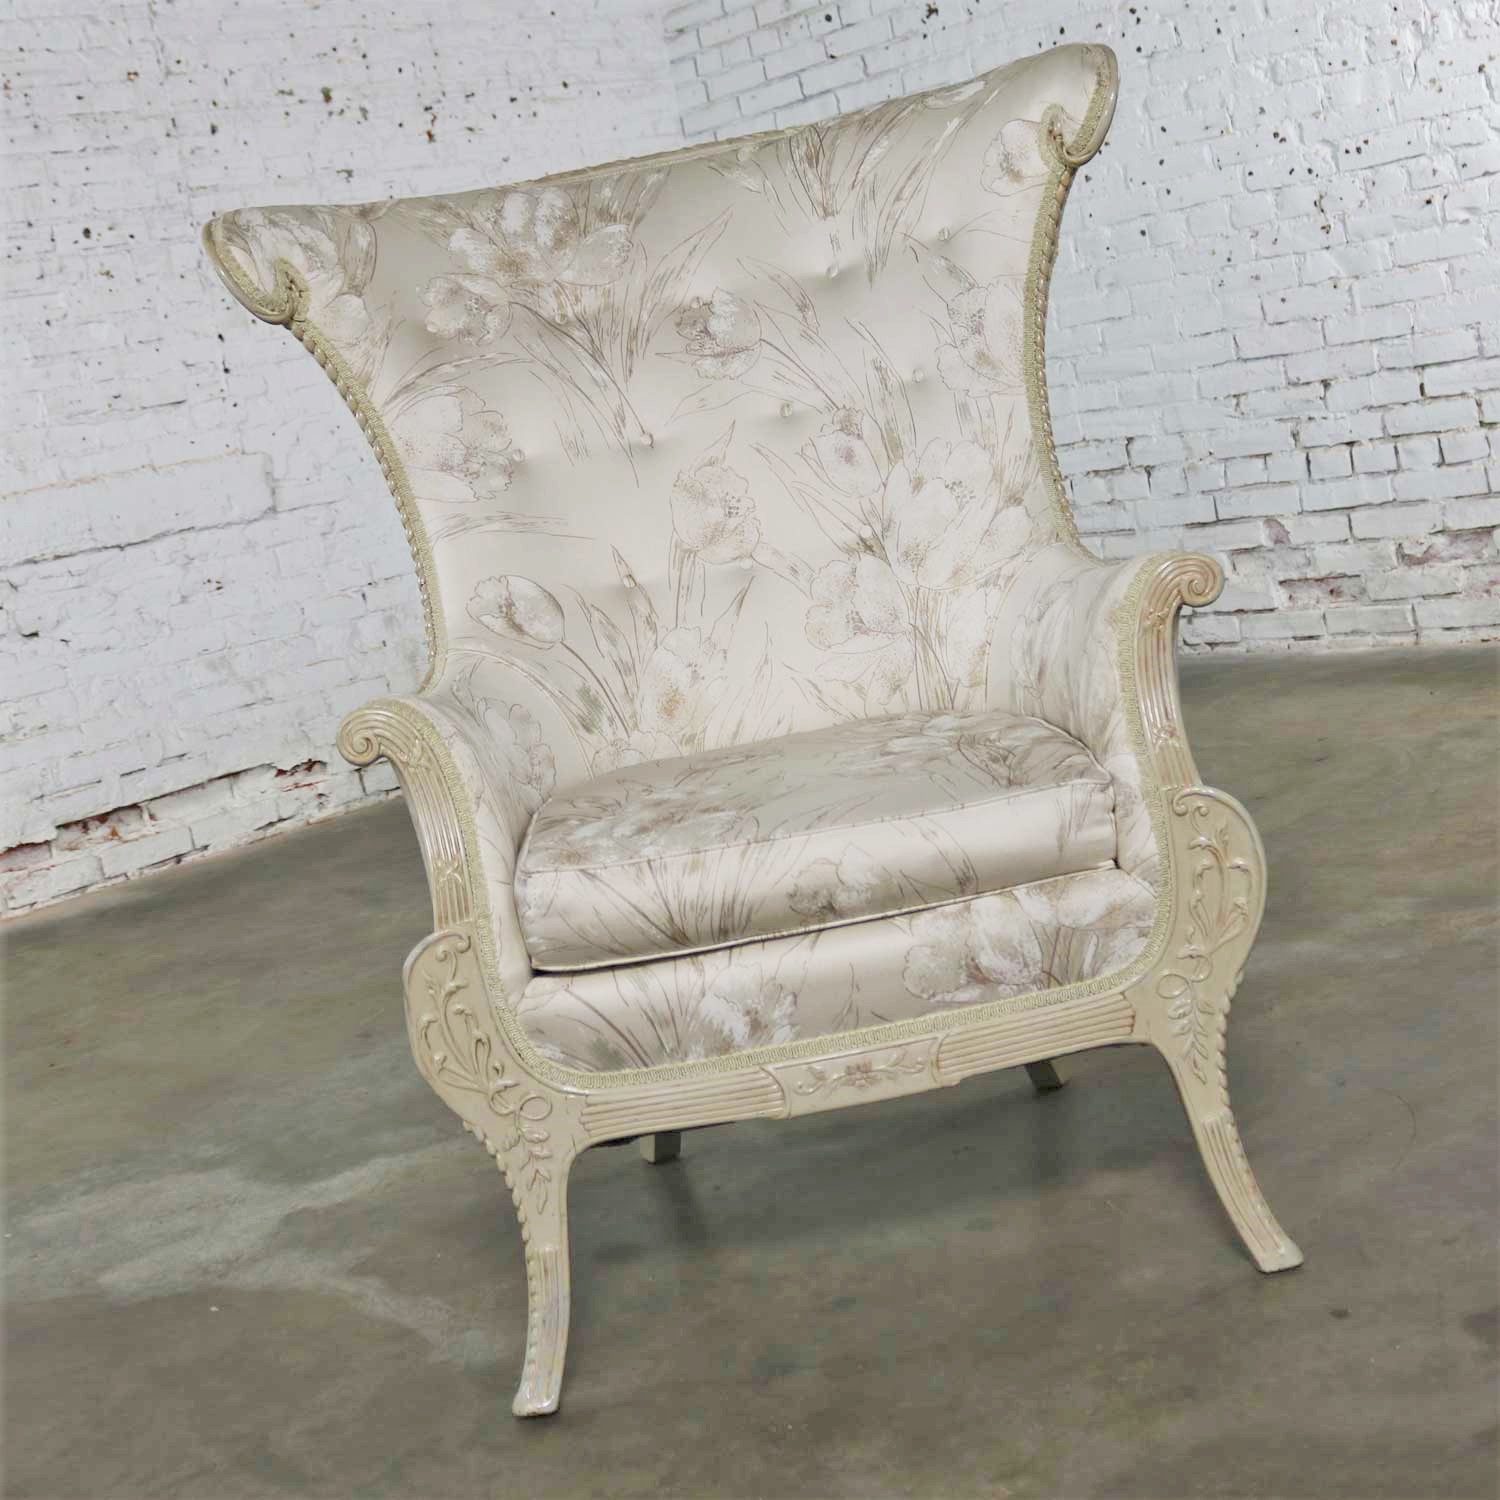 Neoclassic French Style Large Wingback Lounge Chair in Antique White